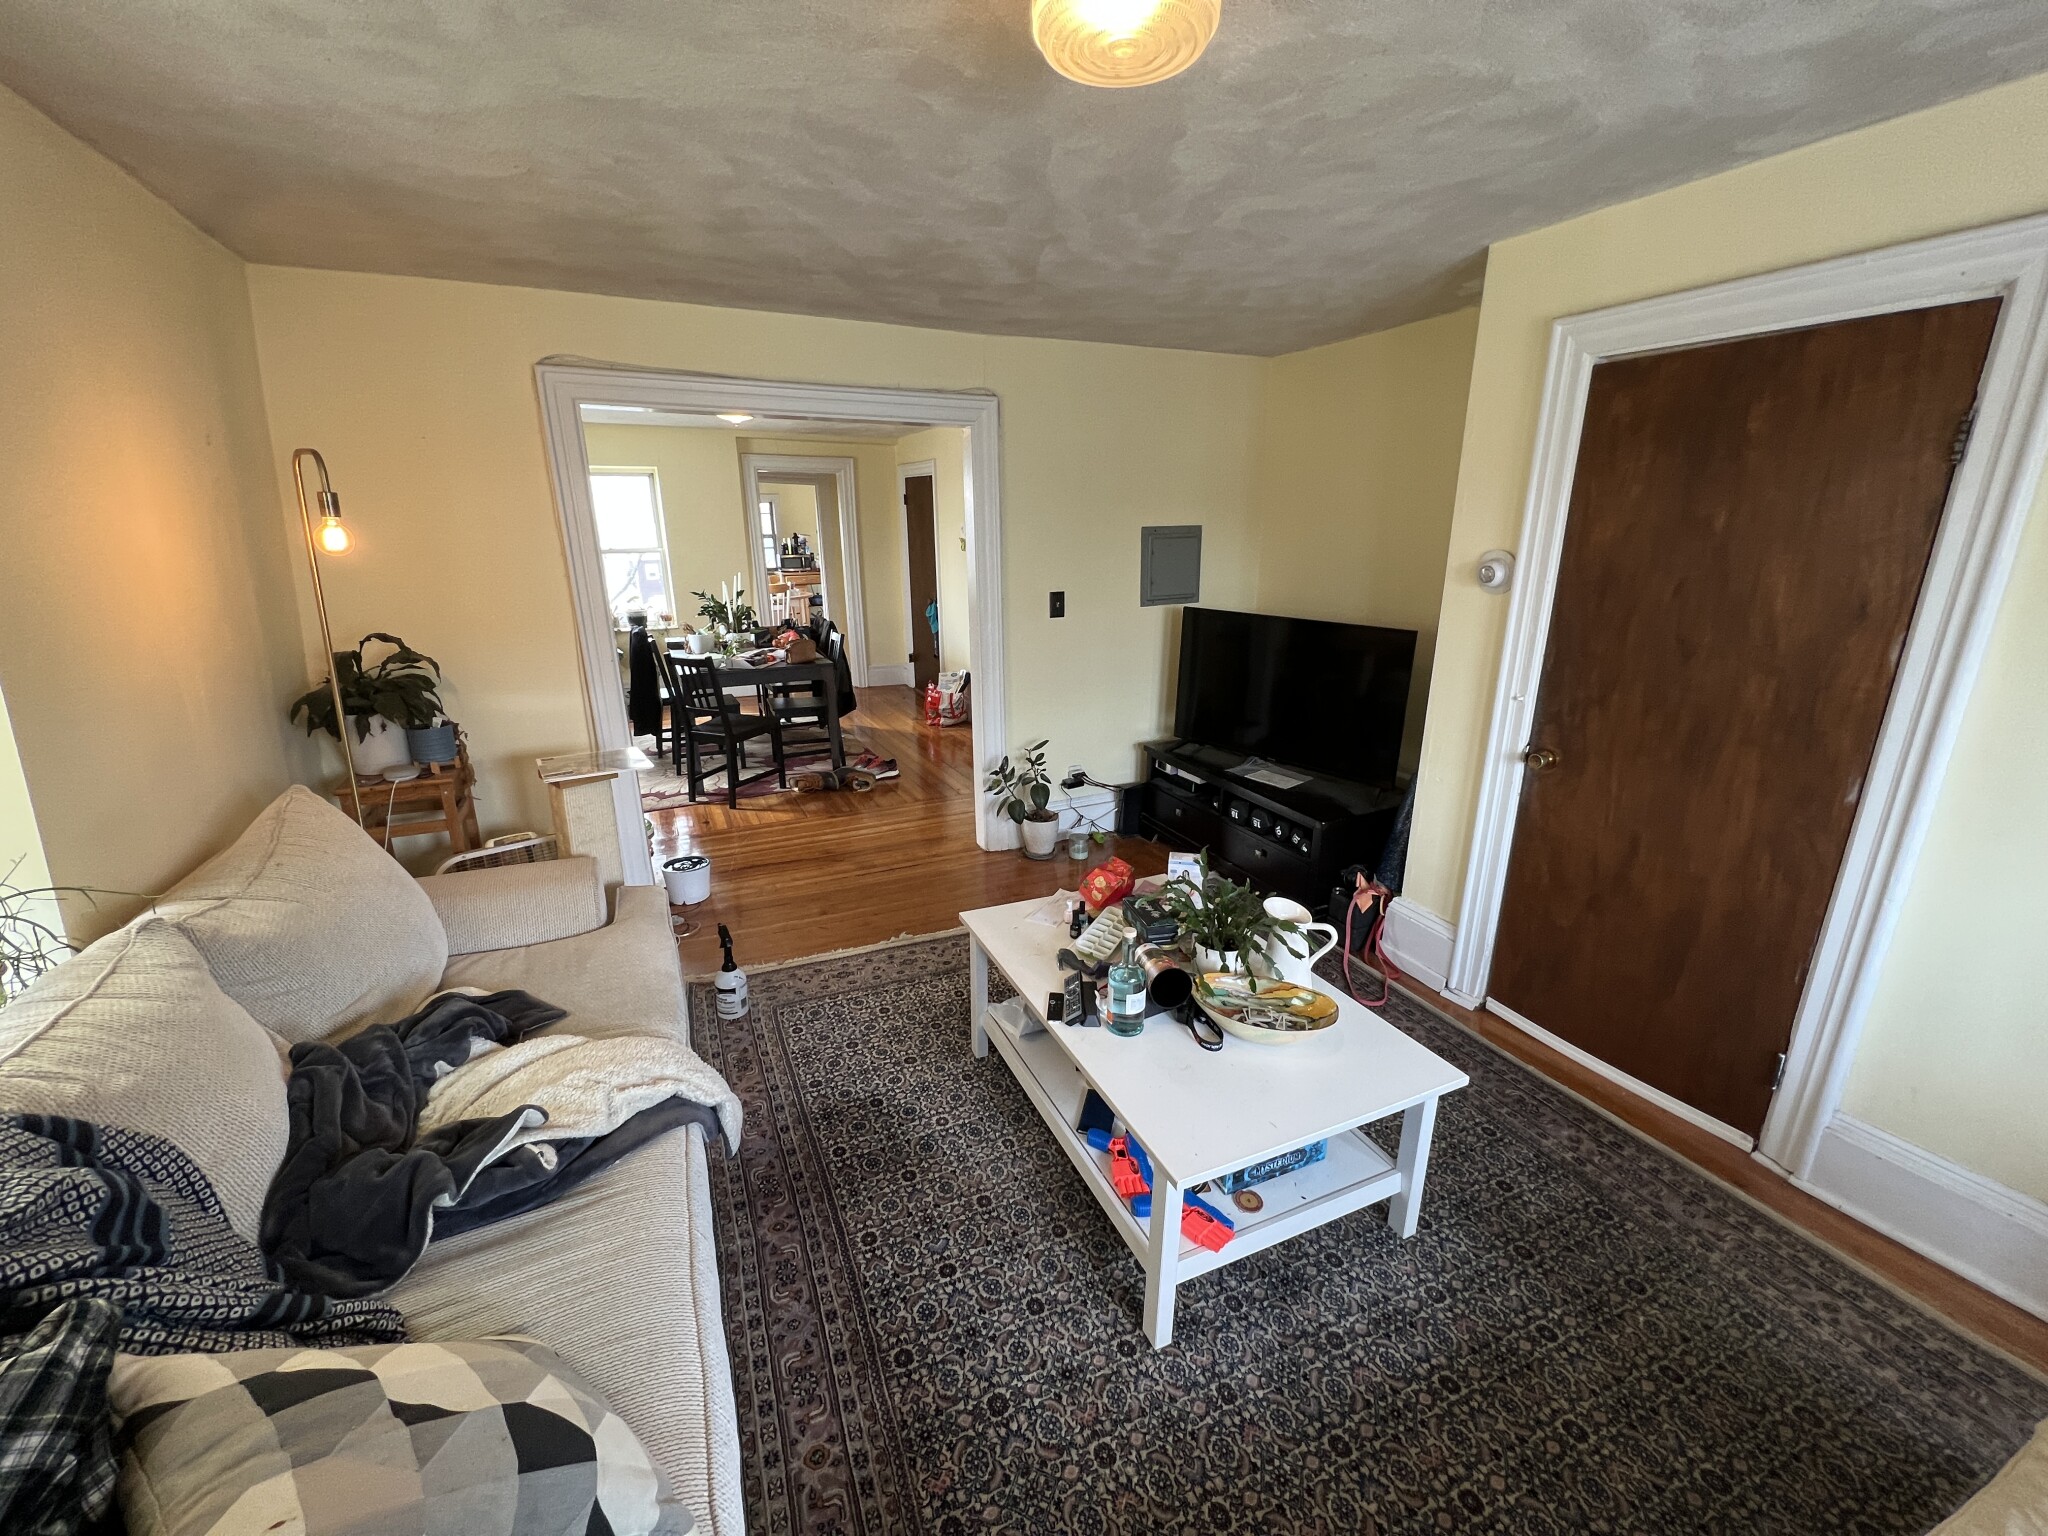 Photos of apartment on Winslow,Somerville MA 02144